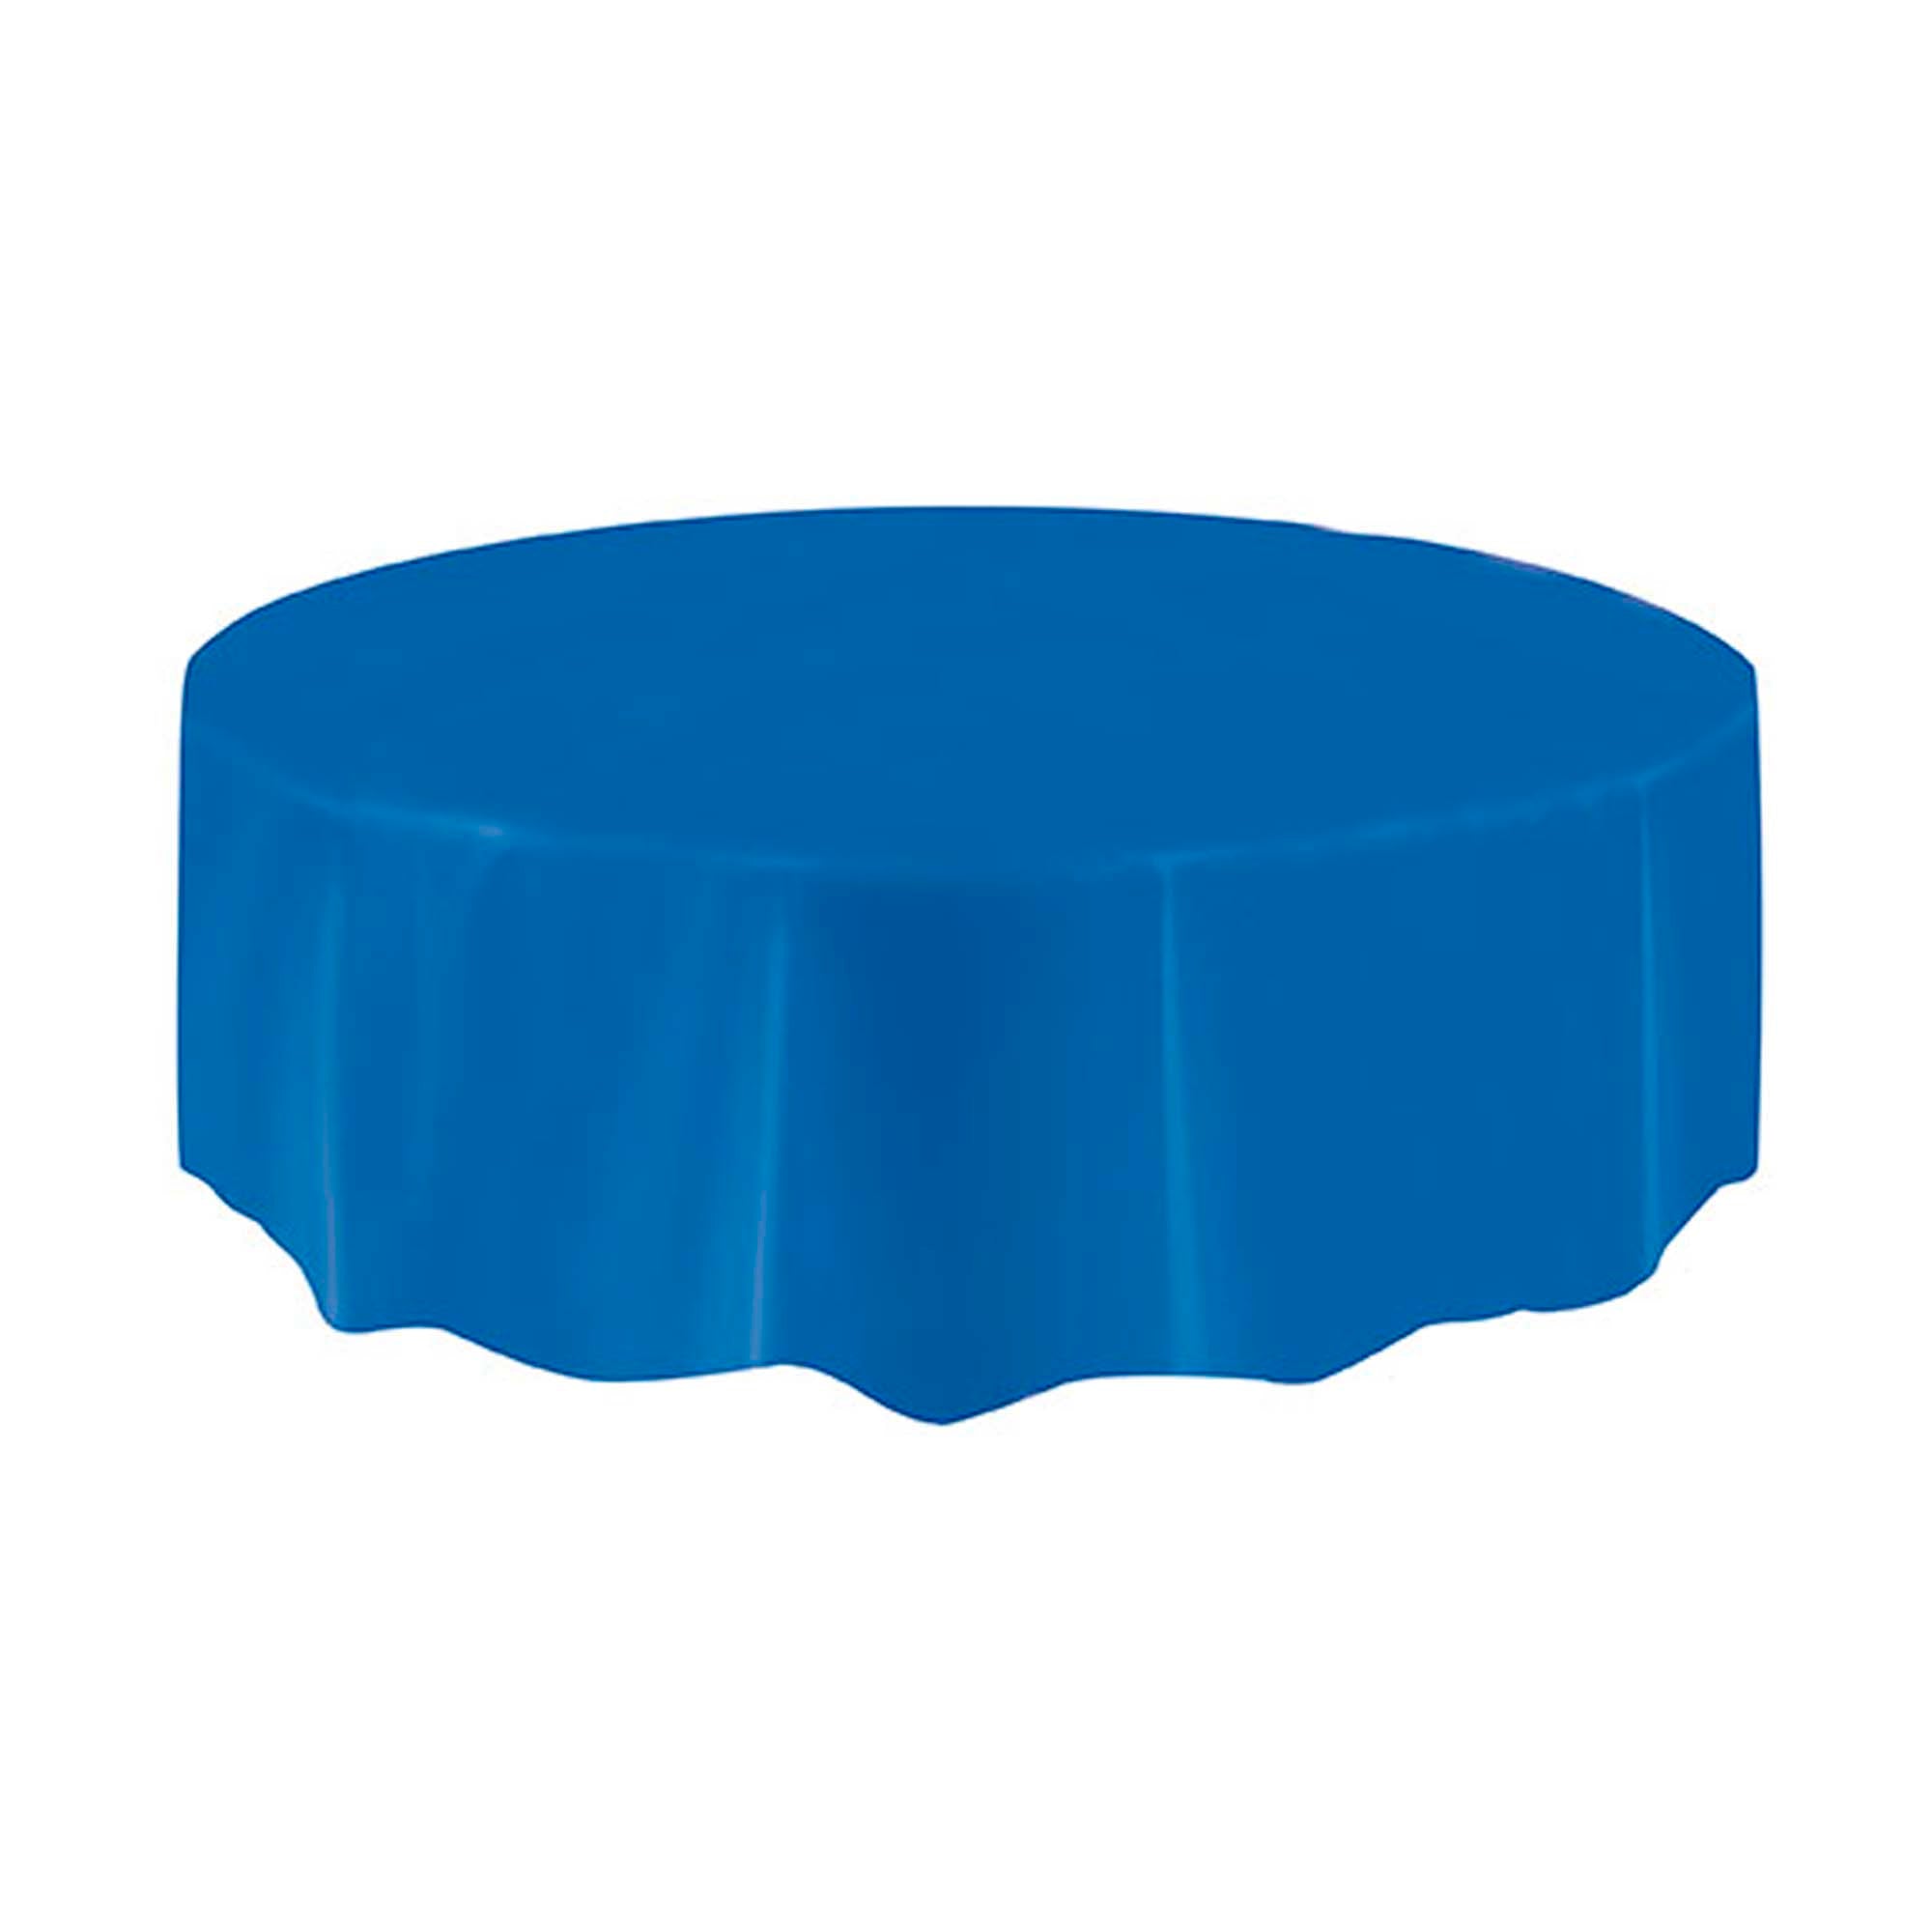 Royal Blue Round Plastic Tablecover, 84 Inches, 1 Count